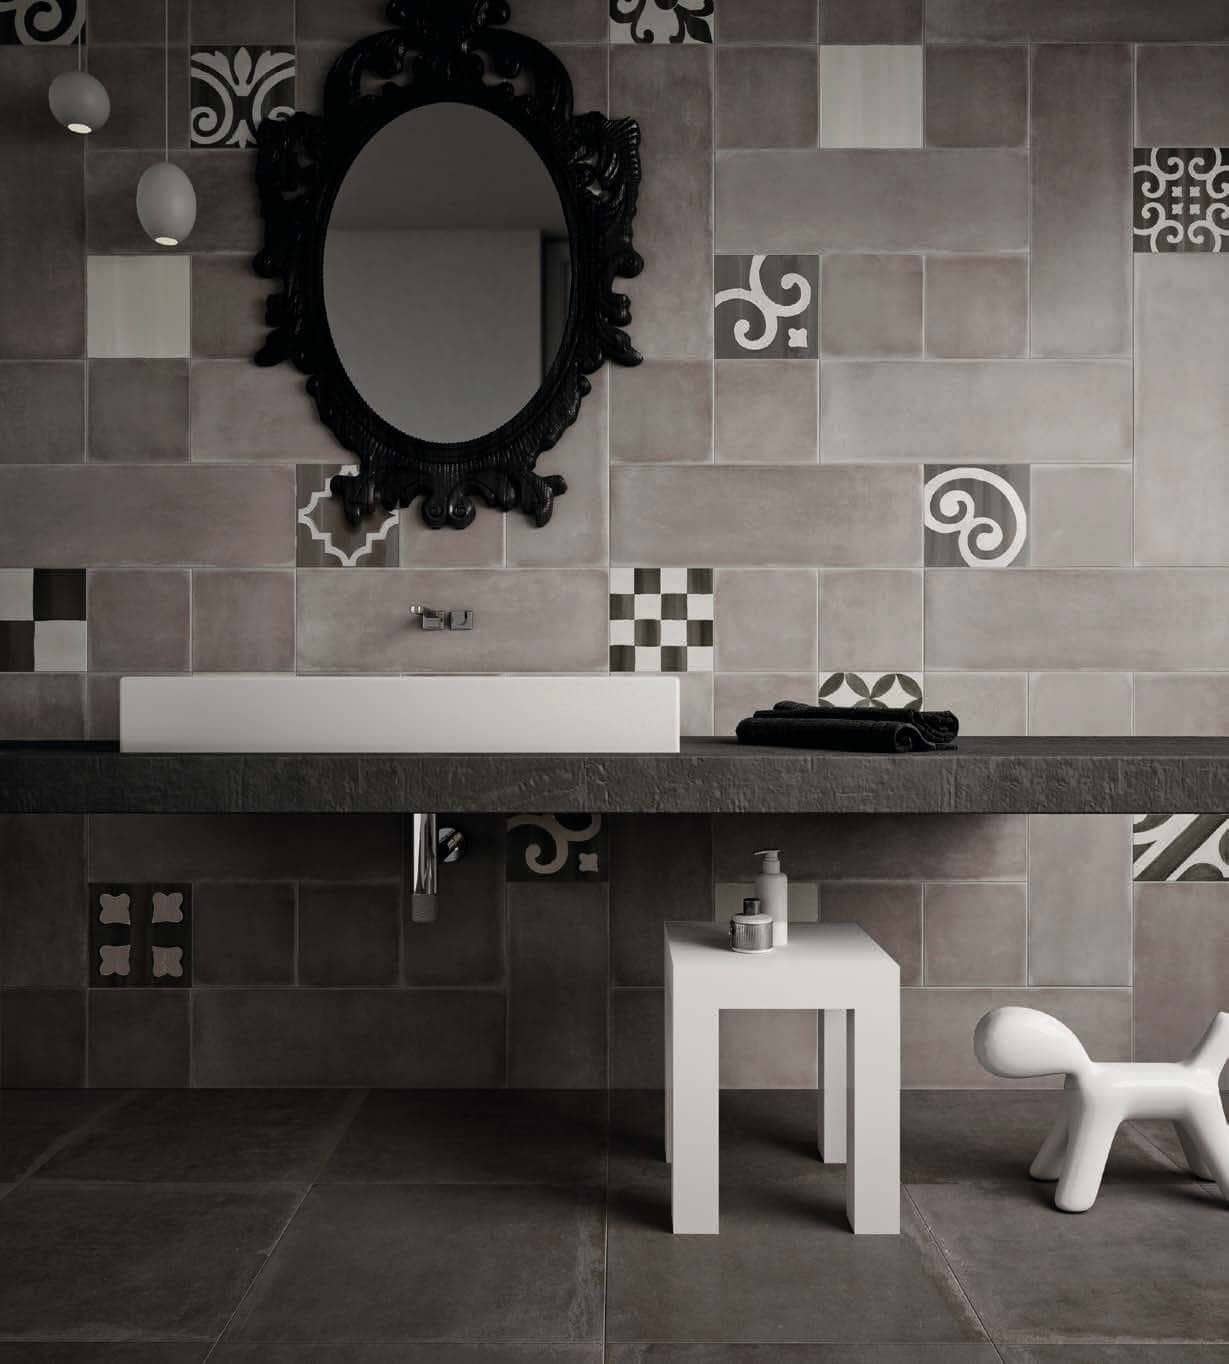 Gry cement-look powder room wall tile with patterned tile interspersed